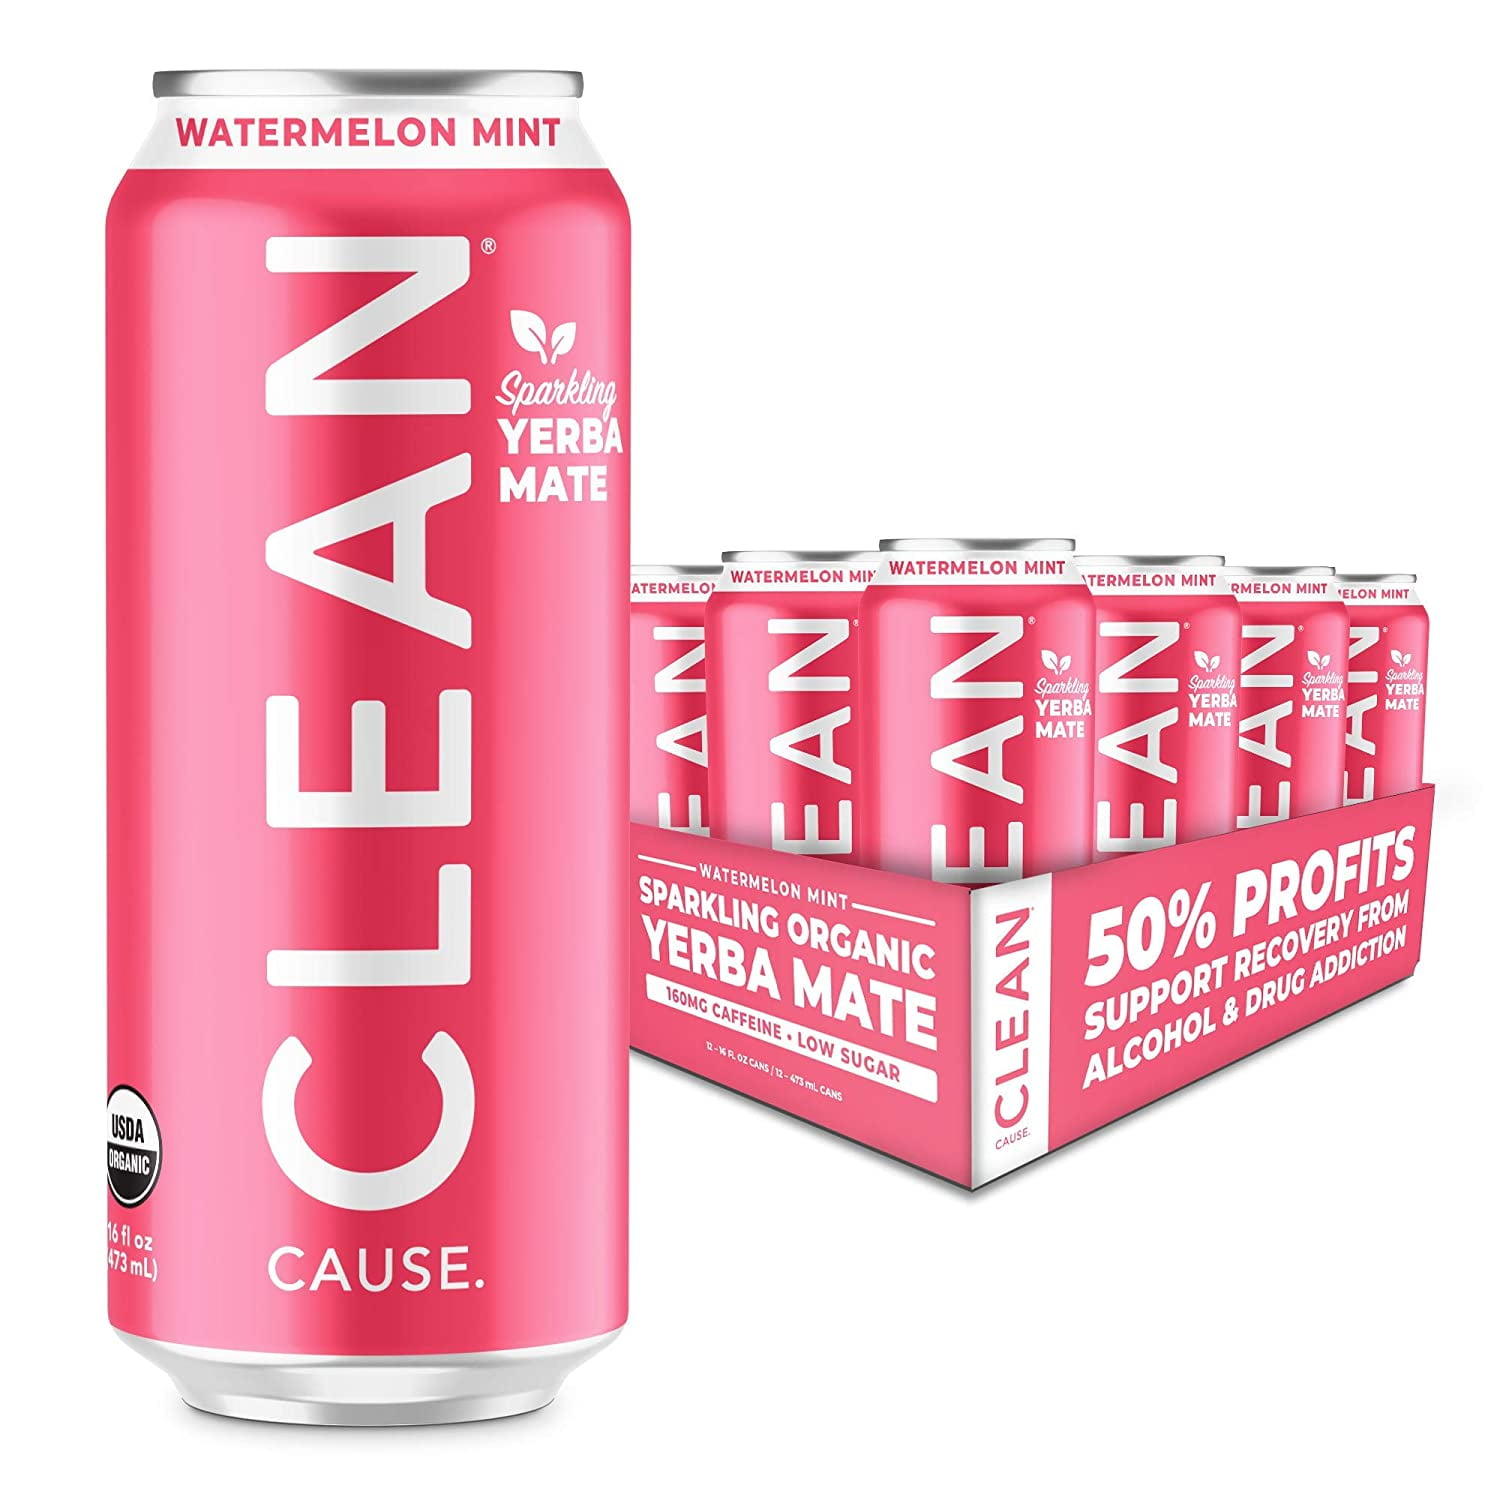 Photo 1 of (12 Cans) CLEAN Cause Watermelon Mint Organic Sparkling Yerba Mate Tea - Organic, Low Calorie Low Sugar (160mg Caffeine), 16 Fl Oz - 50 PROFITS SUPPORT RECOVERY FROM ALCOHOL DRUG ADDICTION bb 1/29/25